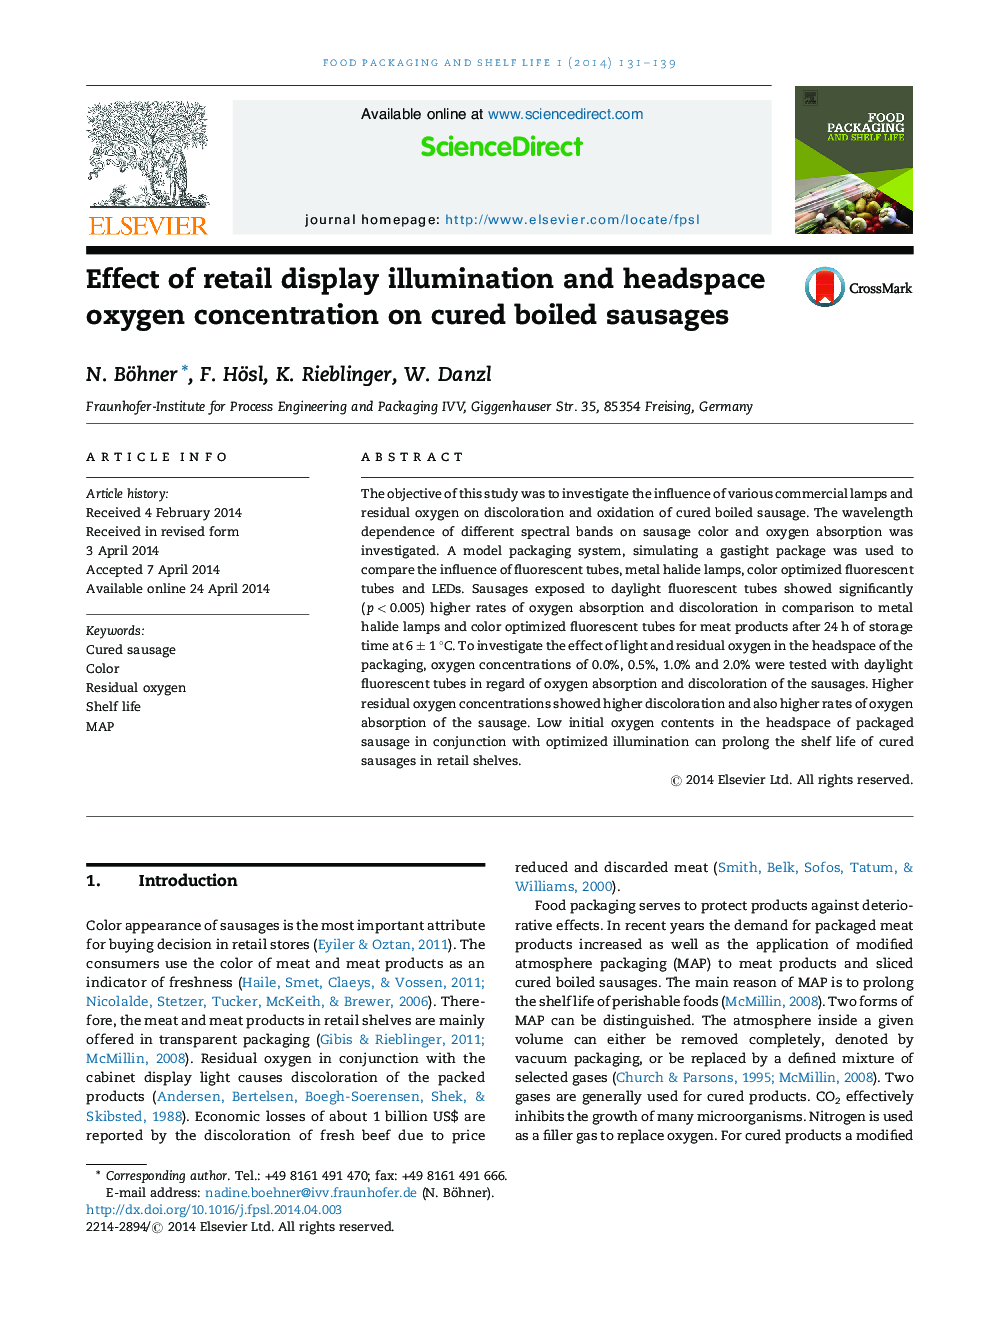 Effect of retail display illumination and headspace oxygen concentration on cured boiled sausages